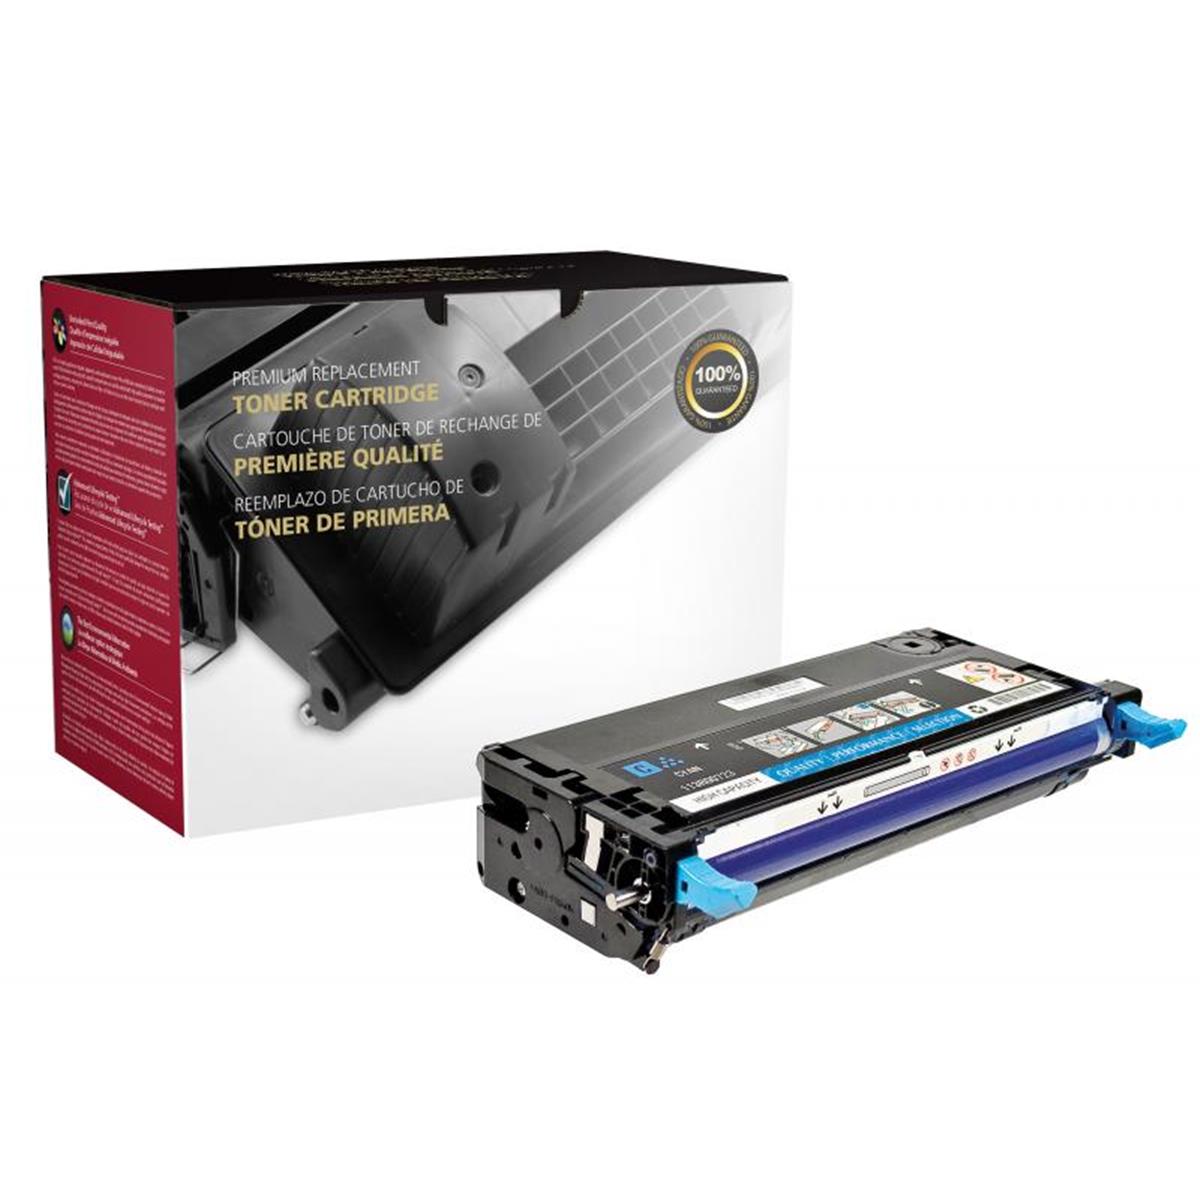 Picture of Dell 200504P High Yield Cyan Toner Cartridge for Dell 3130